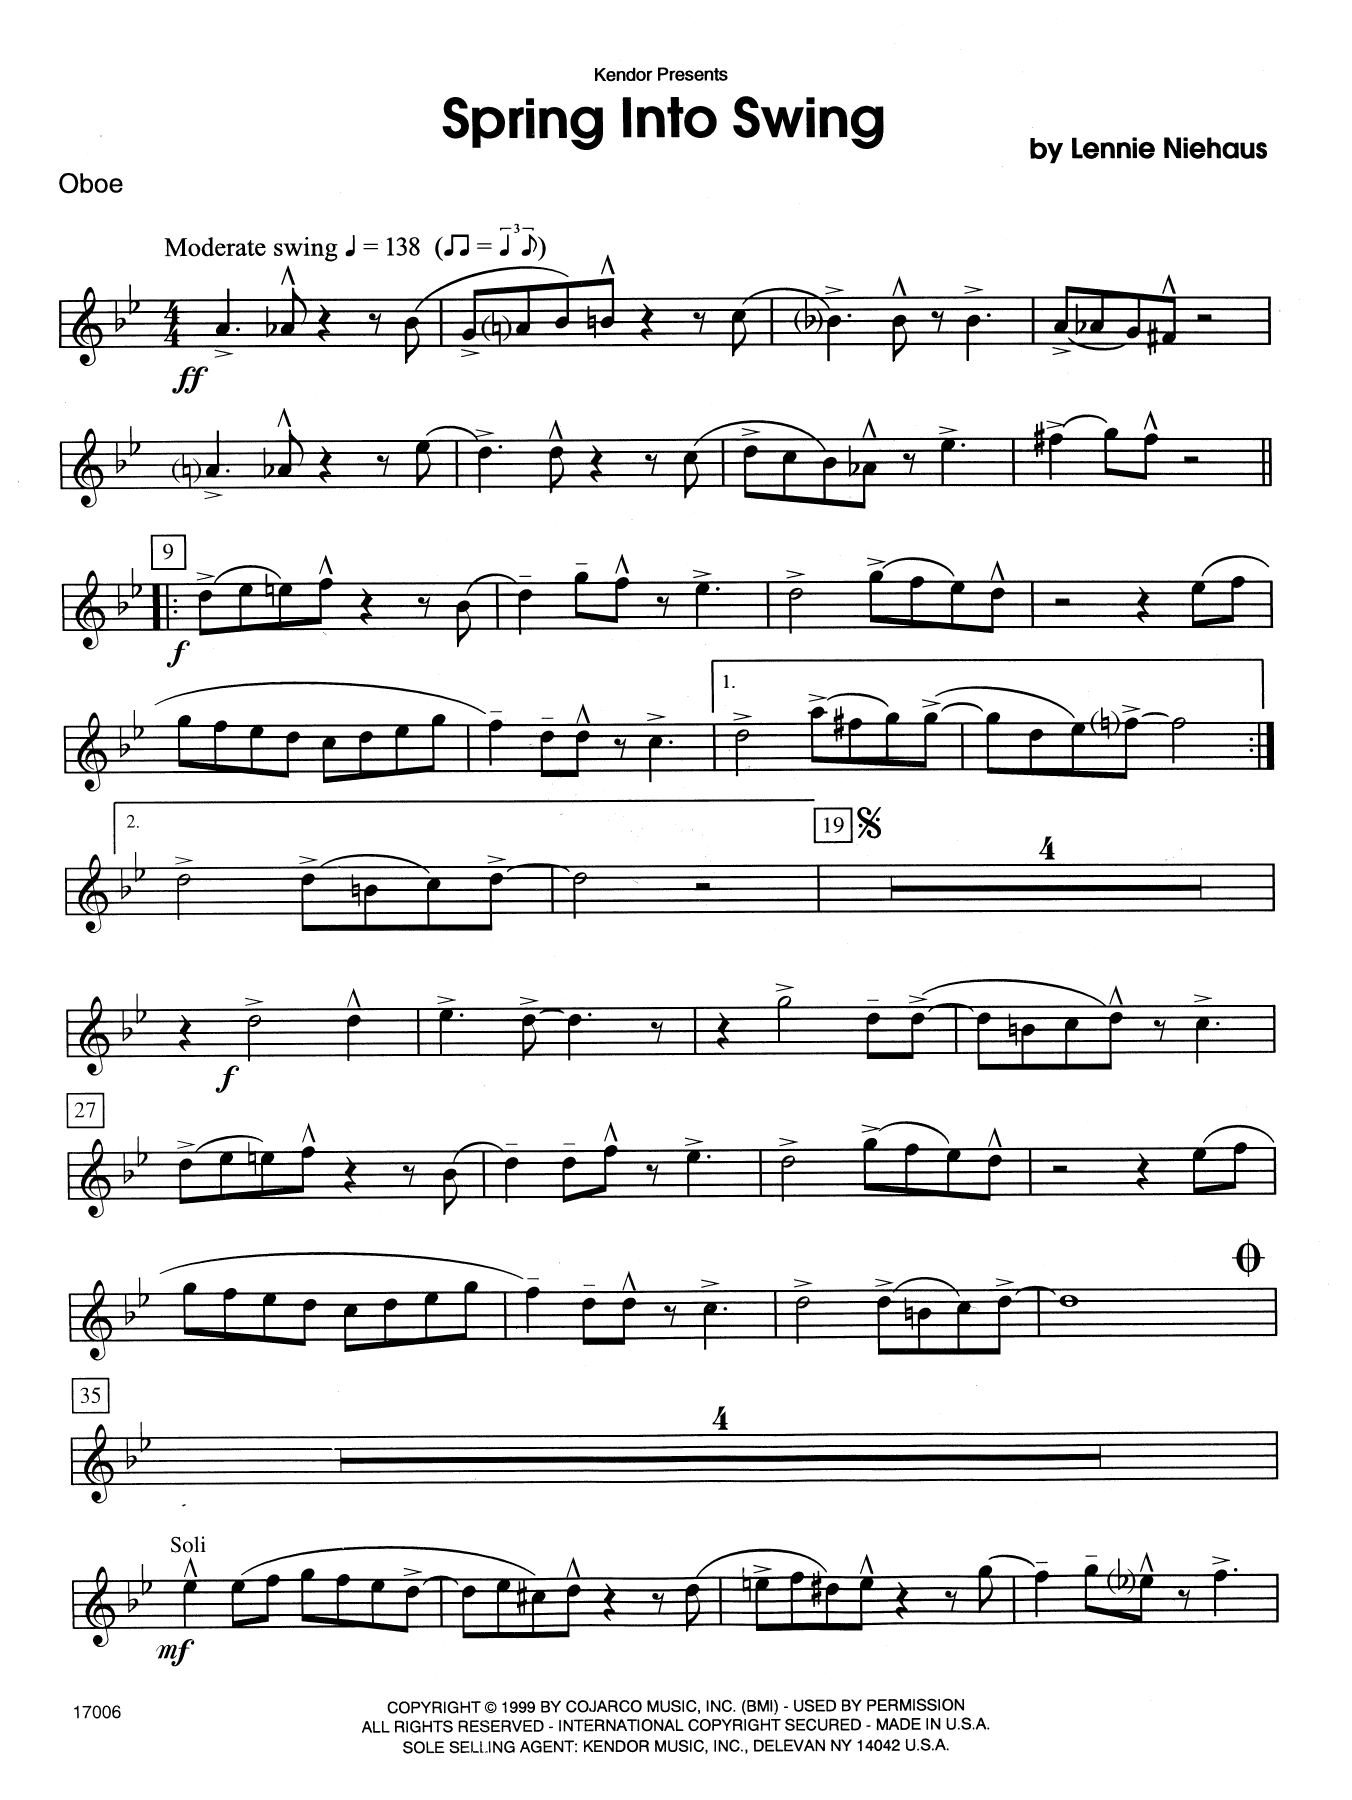 Lennie Niehaus Spring Into Swing - Oboe sheet music notes and chords. Download Printable PDF.